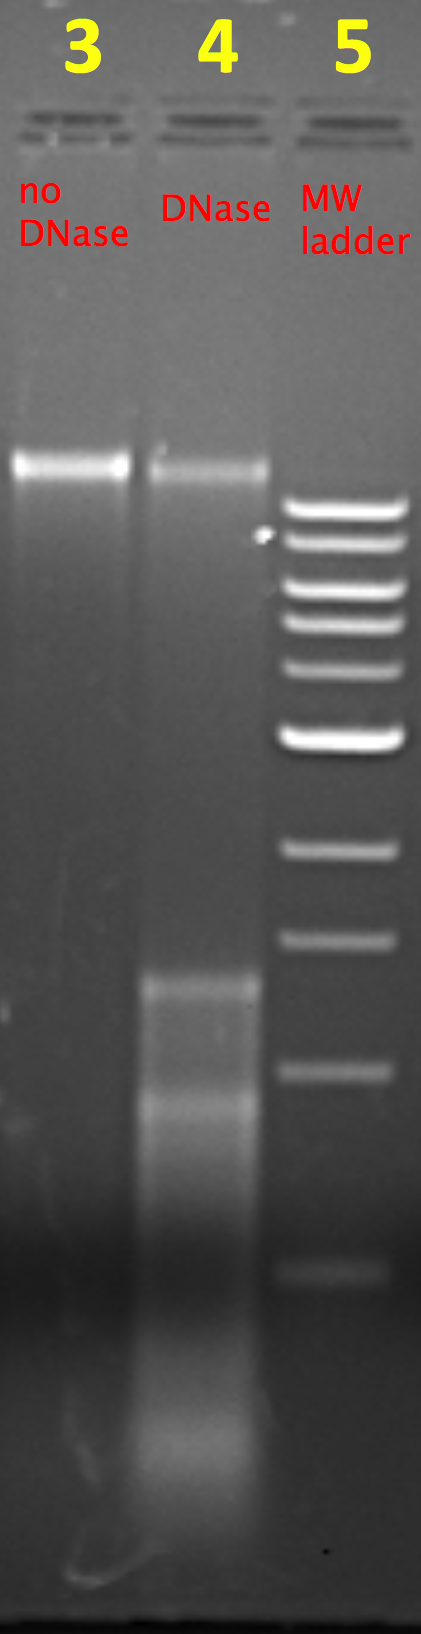 student results: DNA isolation and gel electrophoresis